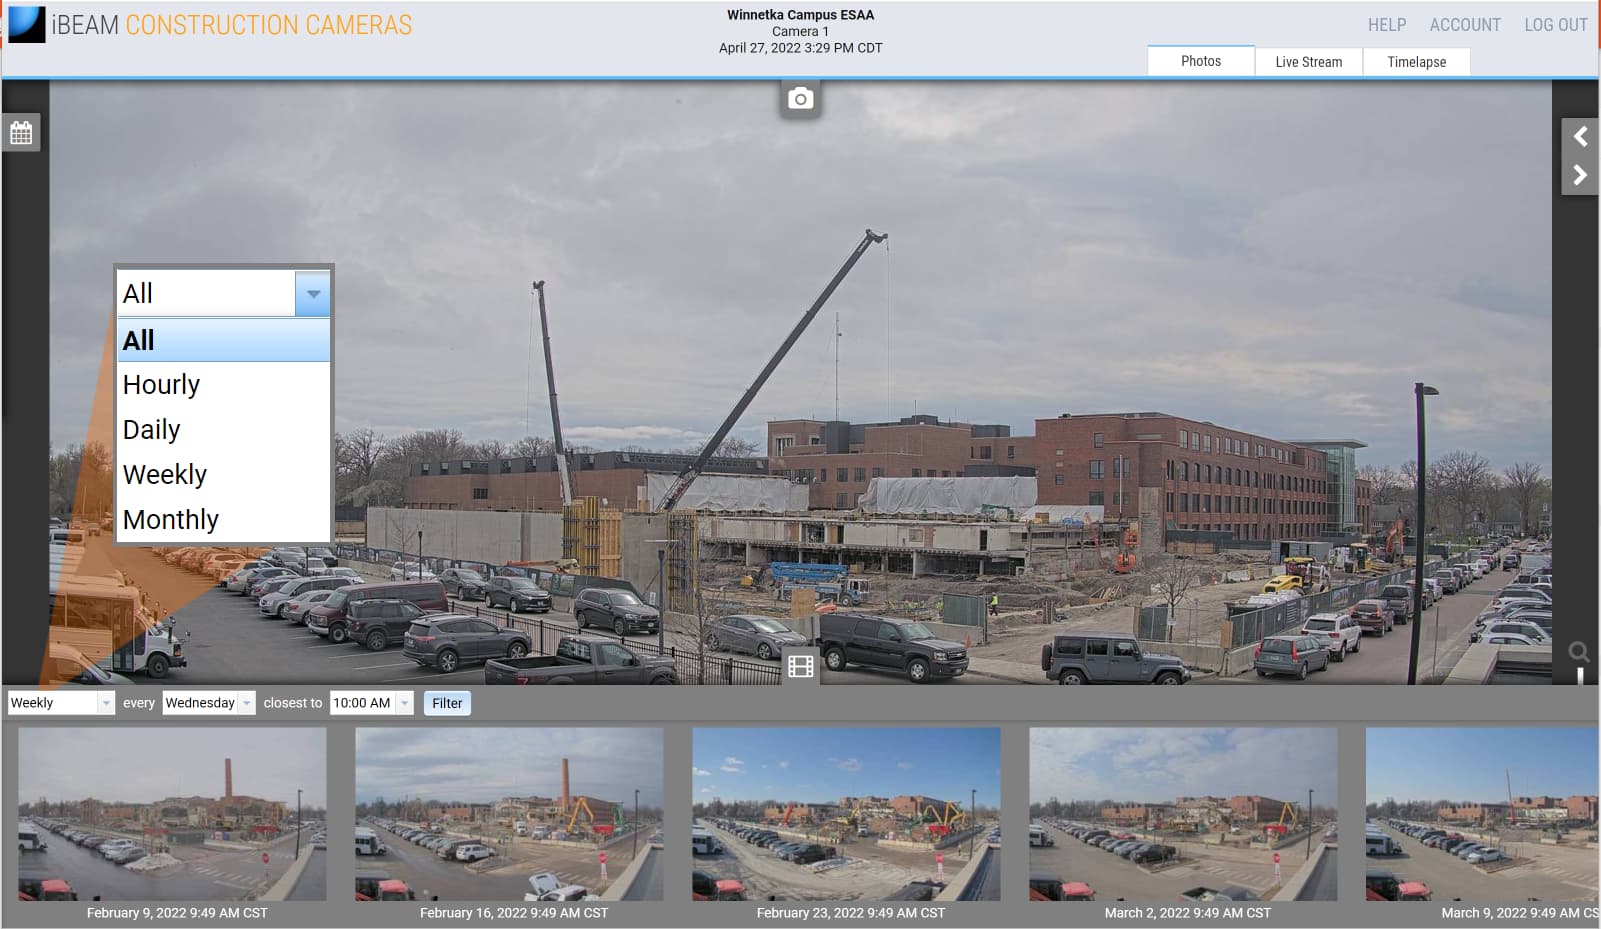 iBEAM Construction Camera online archive filter tool